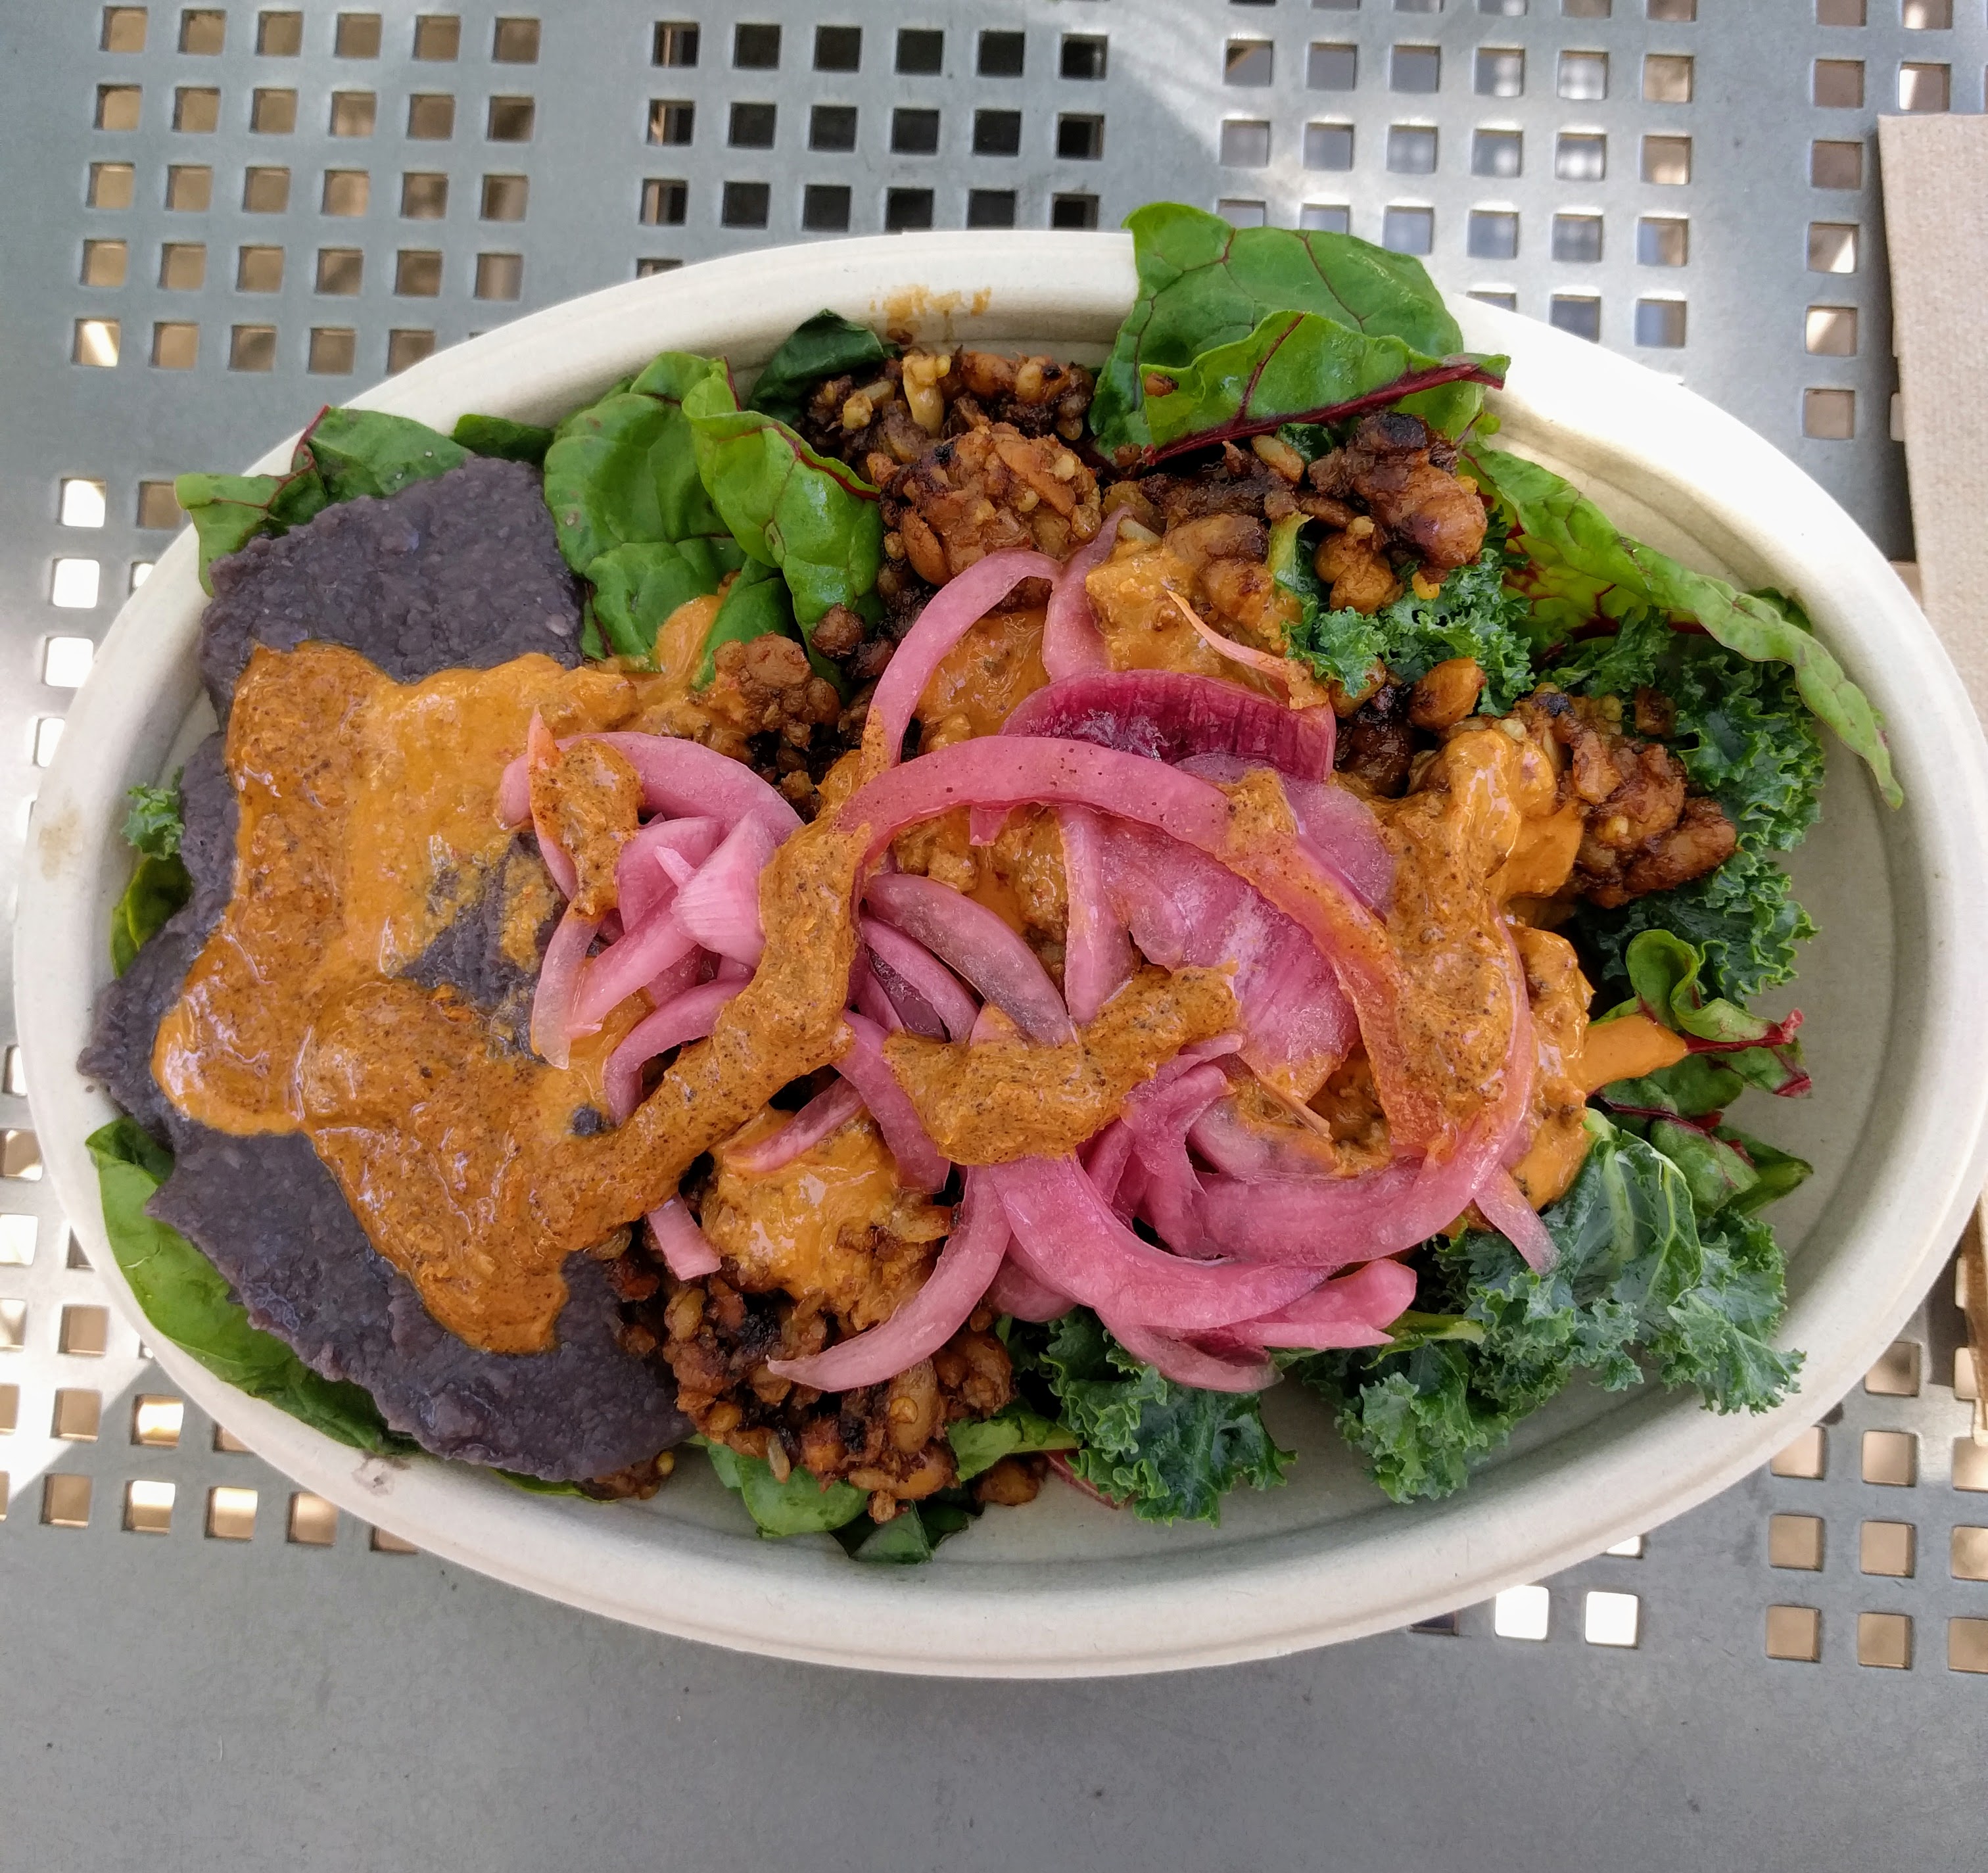 Salad with tempeh, sauces, and pickled red onions